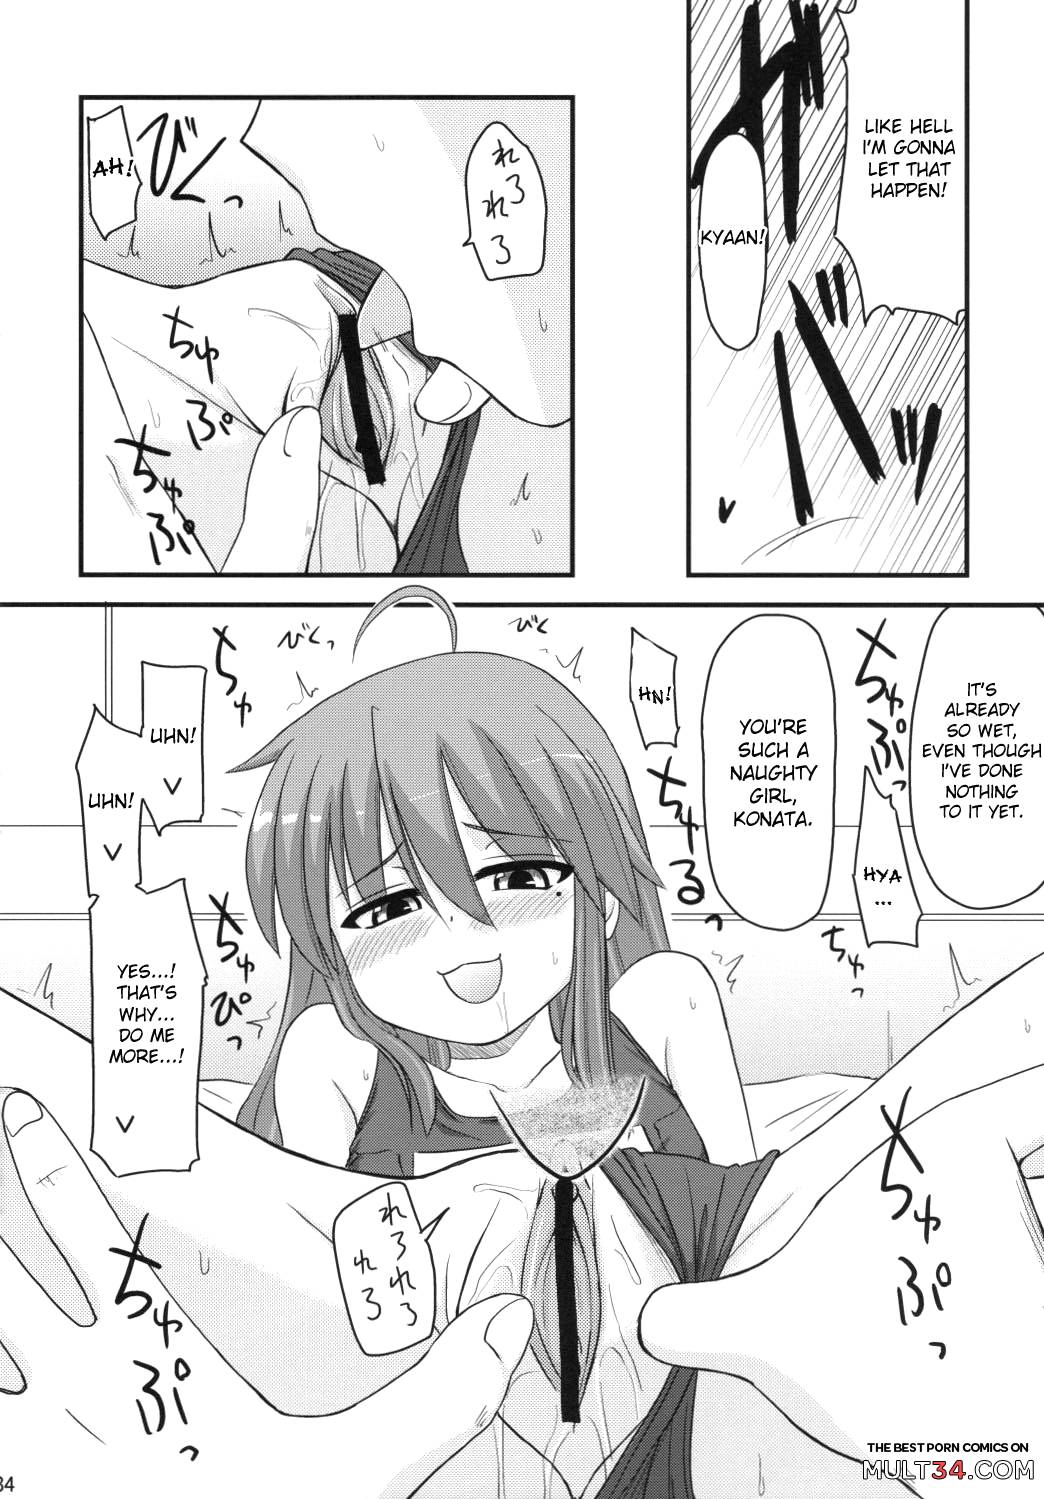 Konata and Oh-zu 4 people each and every one + 1 page 30